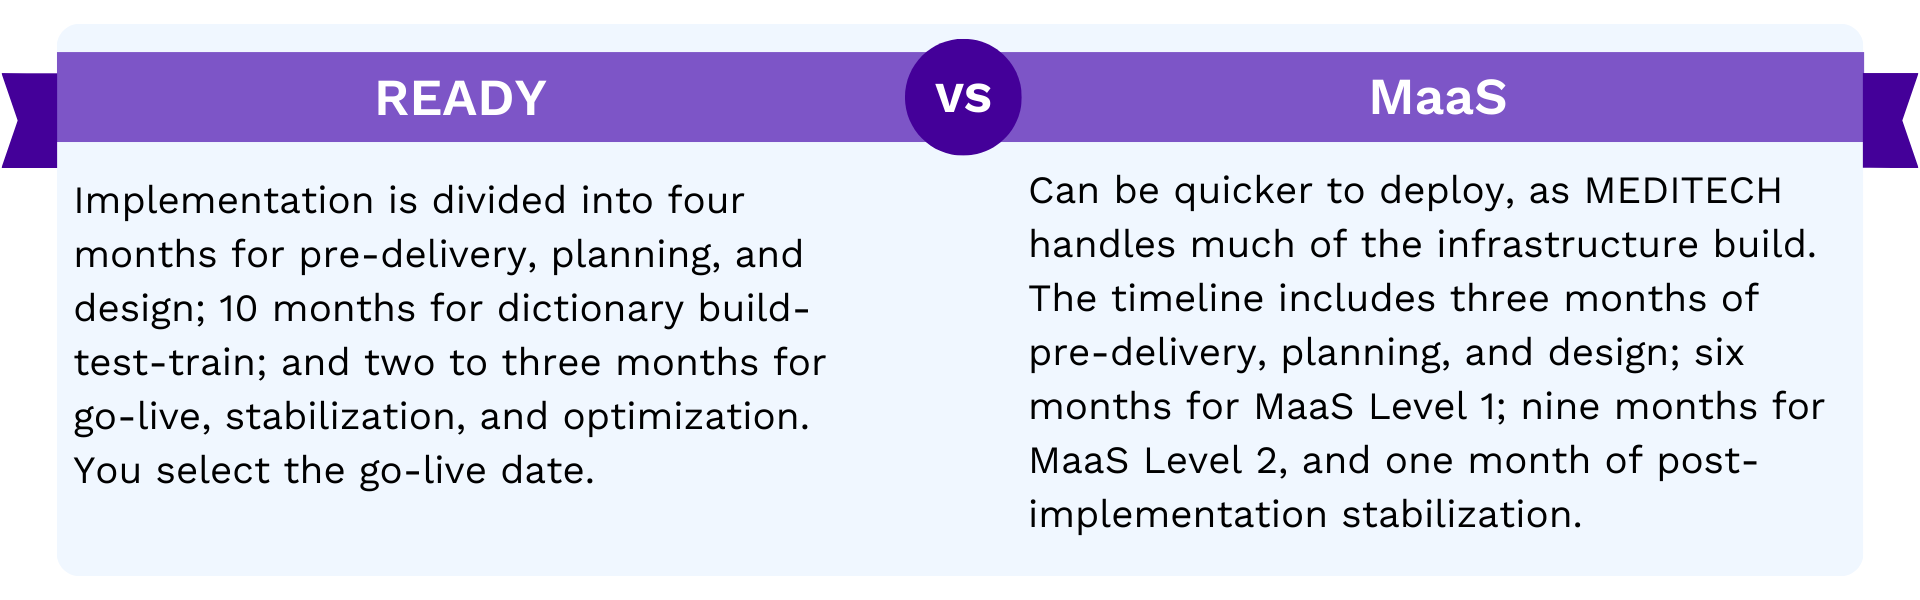 Timeline Considerations: MaaS can be quicker to deploy, as MEDITECH handles much of the infrastructure build.